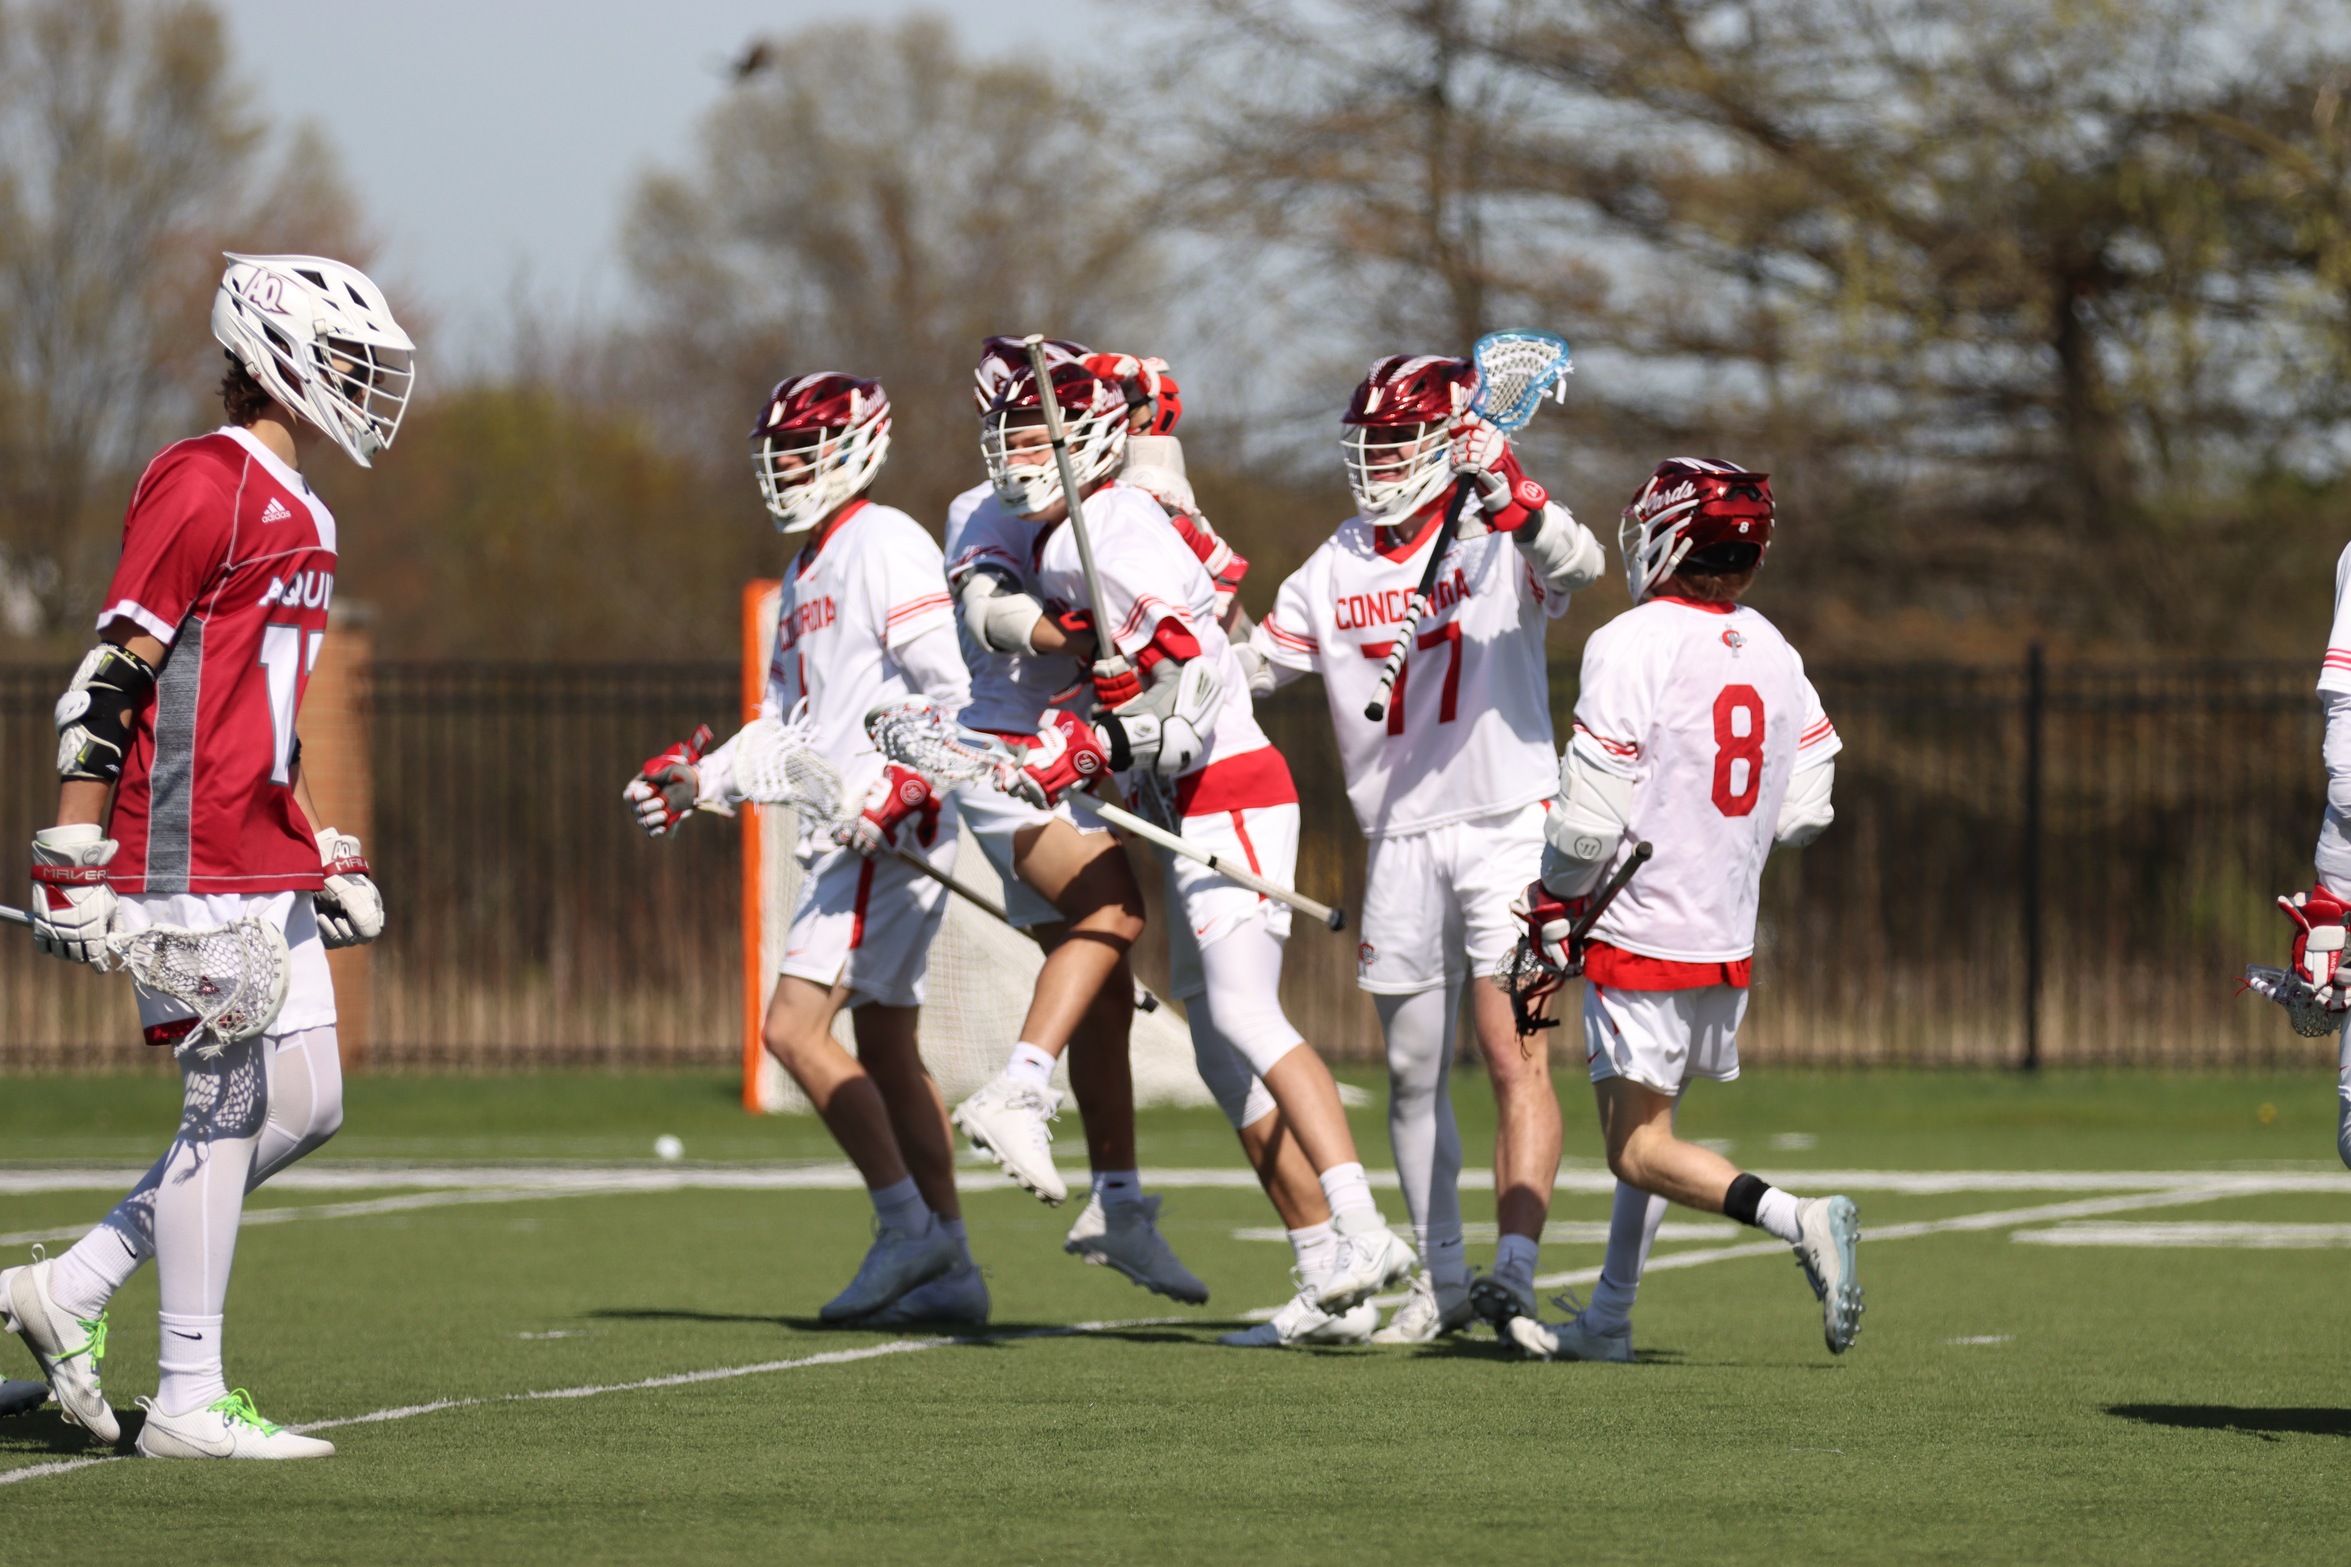 Men's Lacrosse advances to WHAC Championship with 13-5 win over Aquinas